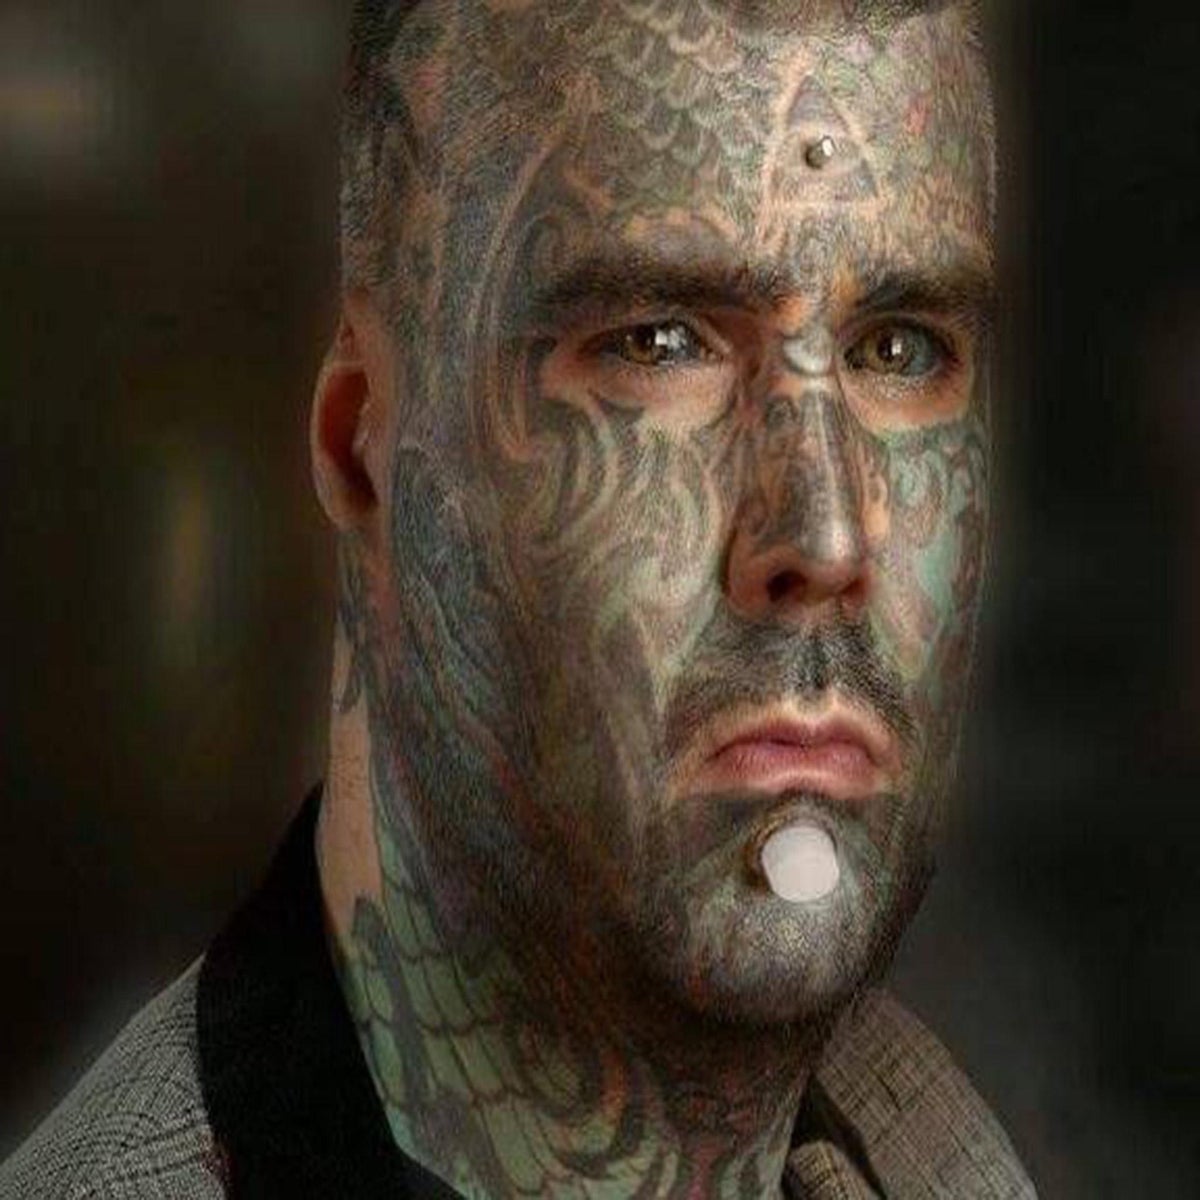 Body Art: UK's most tattoed man who dyed his eyes calls for equal treatment  of people with modifications, The Independent